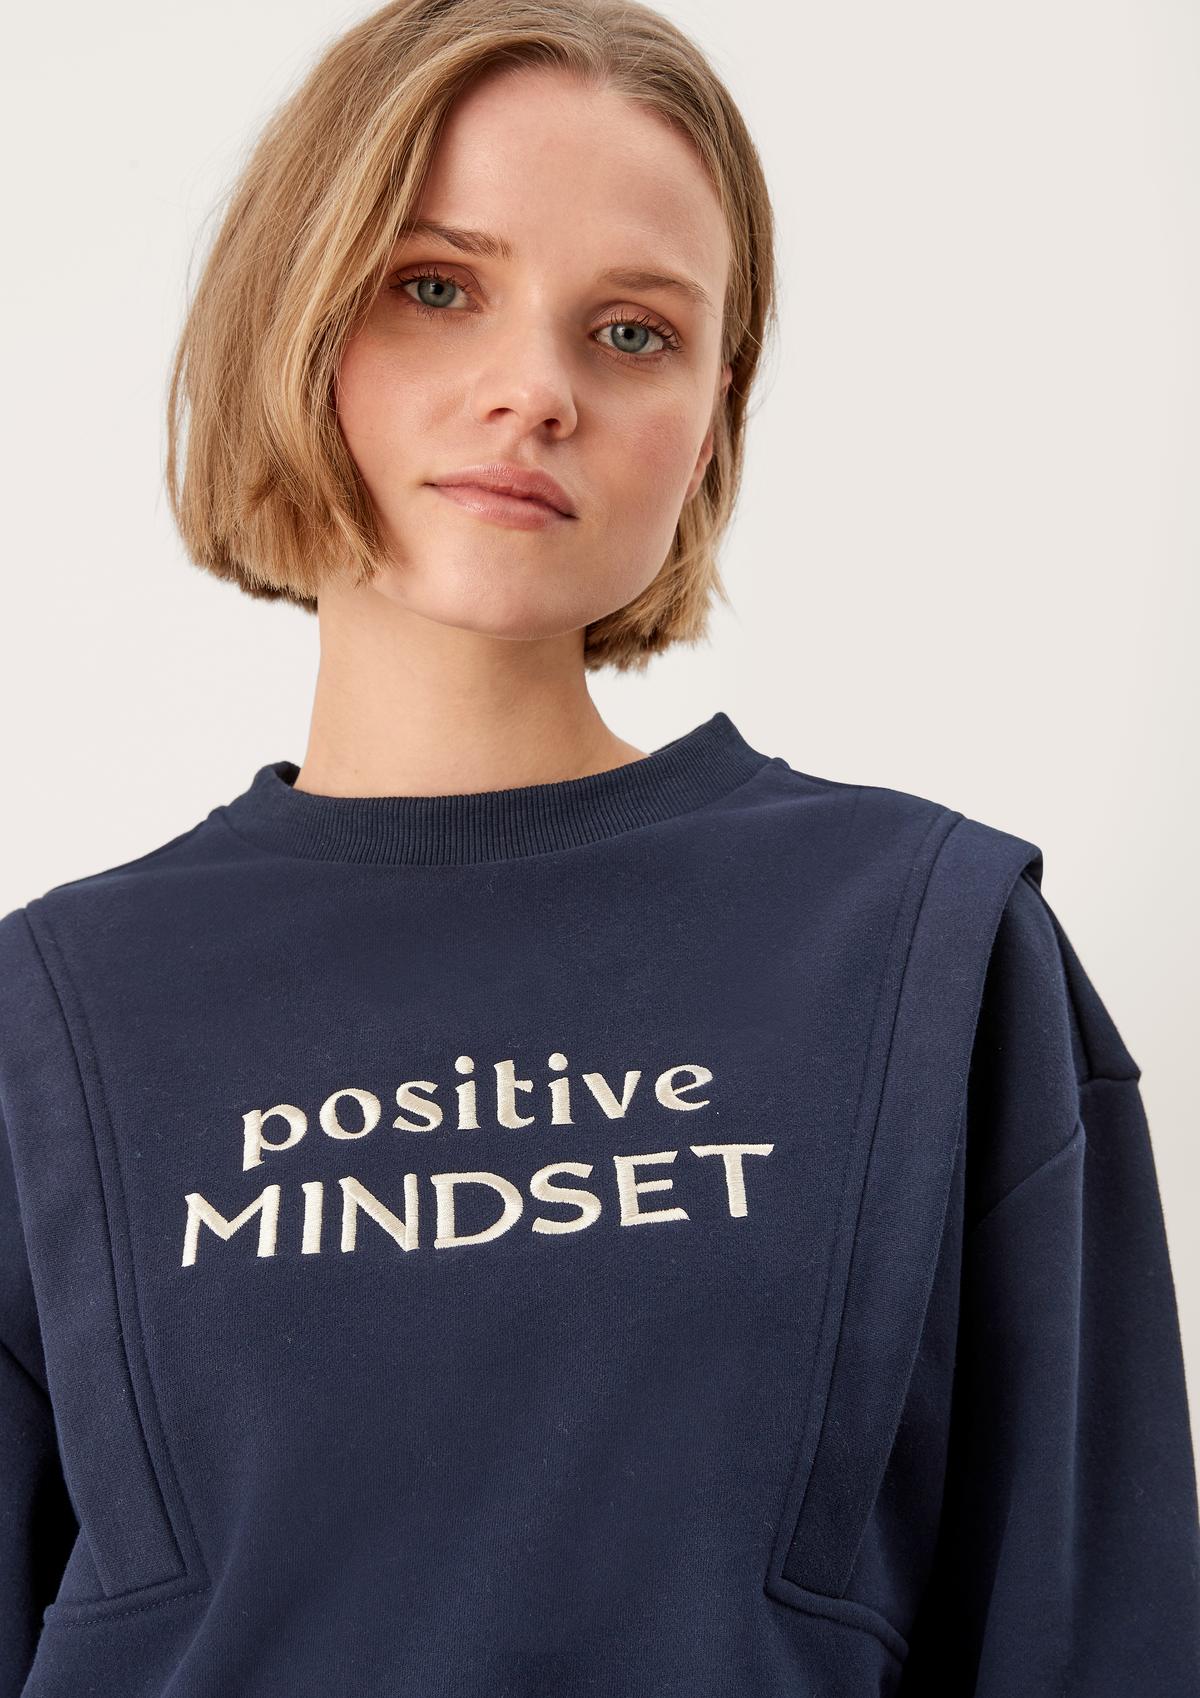 s.Oliver Soft sweatshirt with lettering